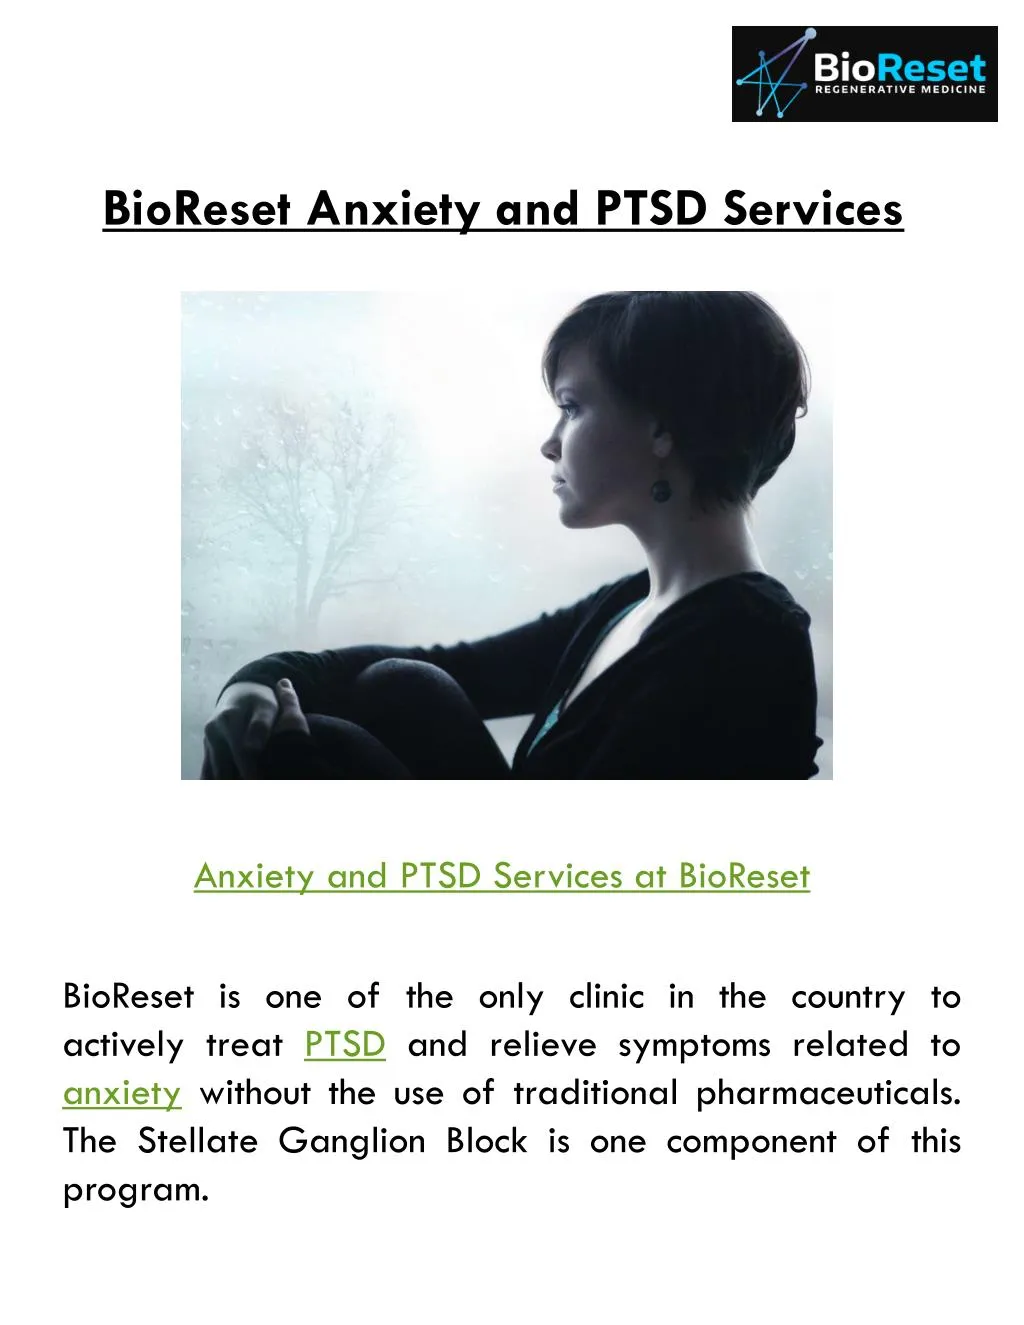 bioreset anxiety and ptsd services